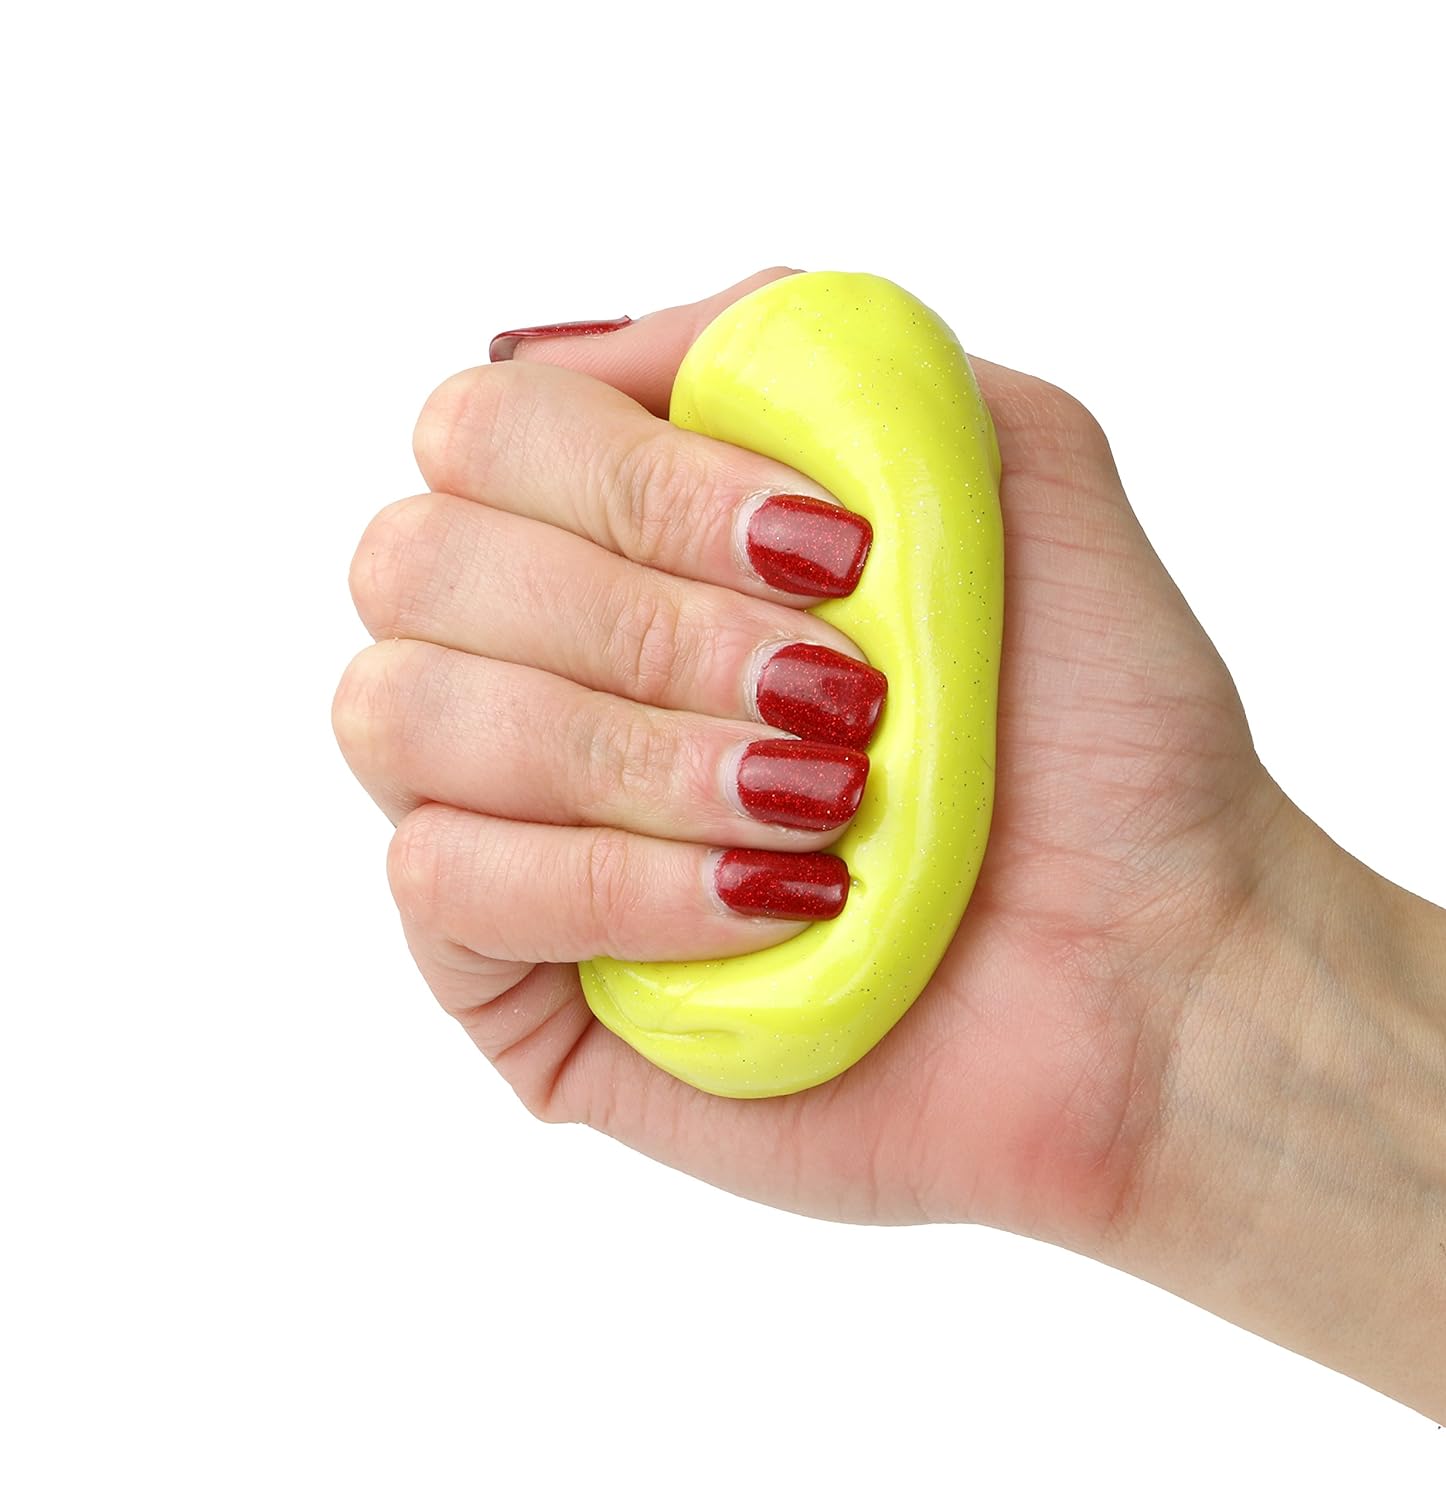 A hand with light skin tone and red sparkly nail polish squeezes the yellow Sparkle TheraPutty.